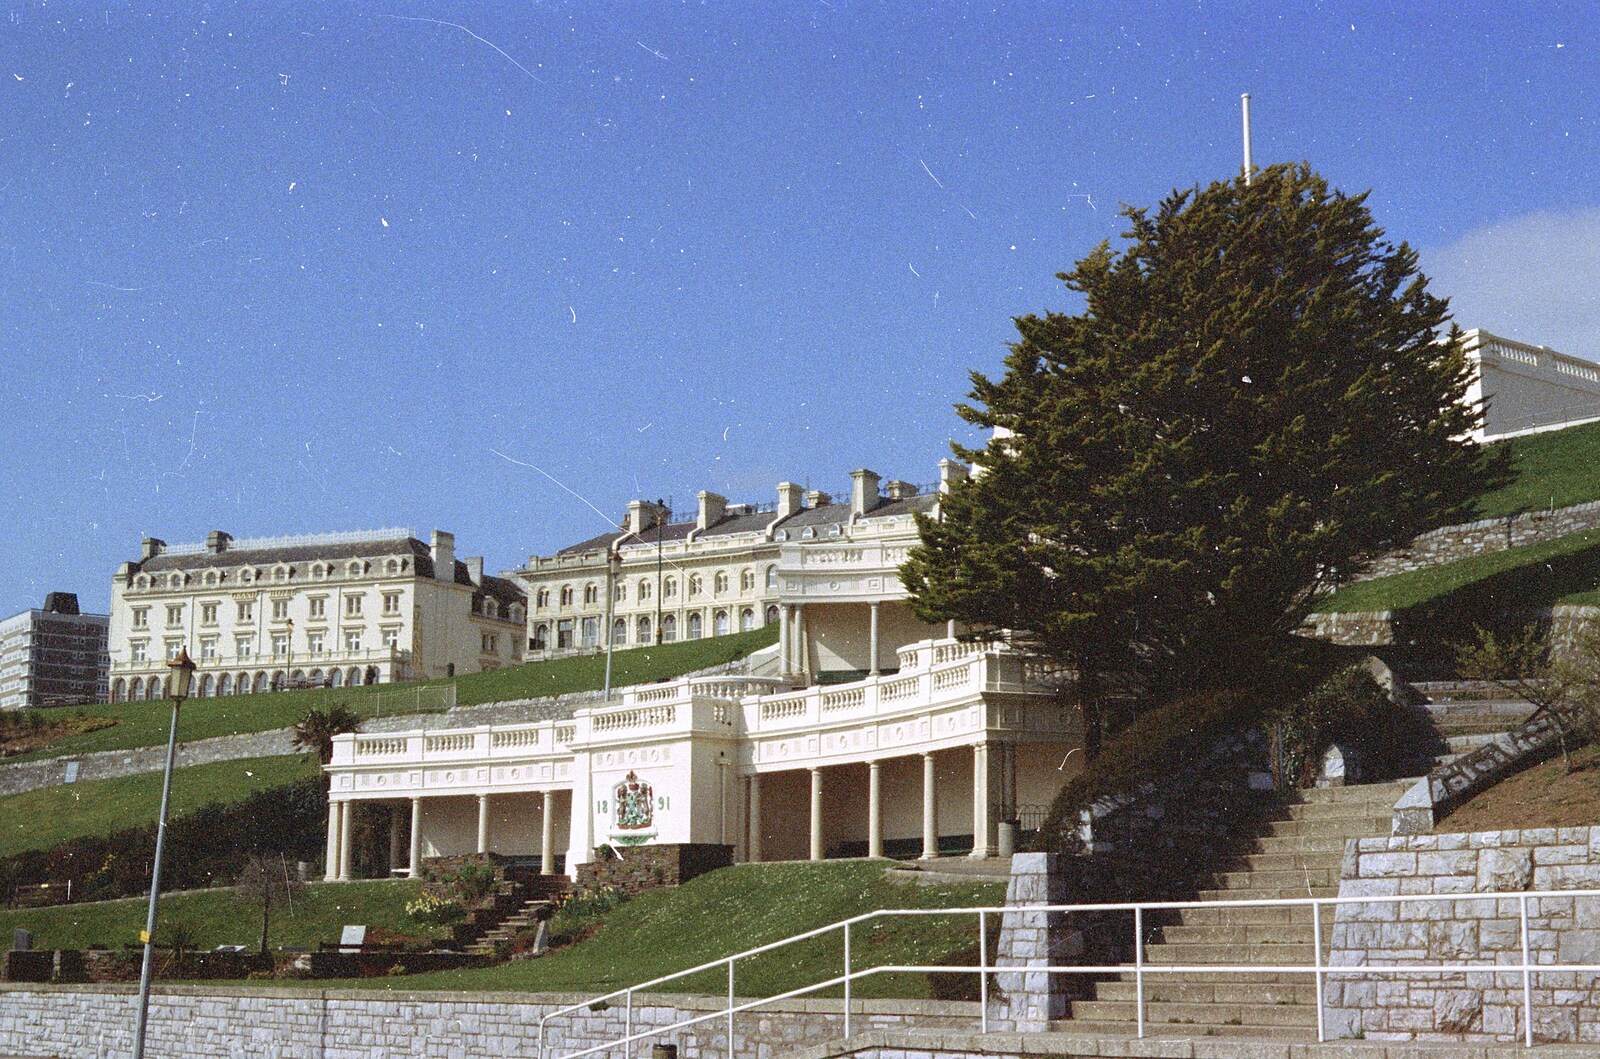 The Belvedere, built in 1891, on Plymouth Hoe from Uni: A CISU Trip To Plymouth, Devon - 16th March 1996